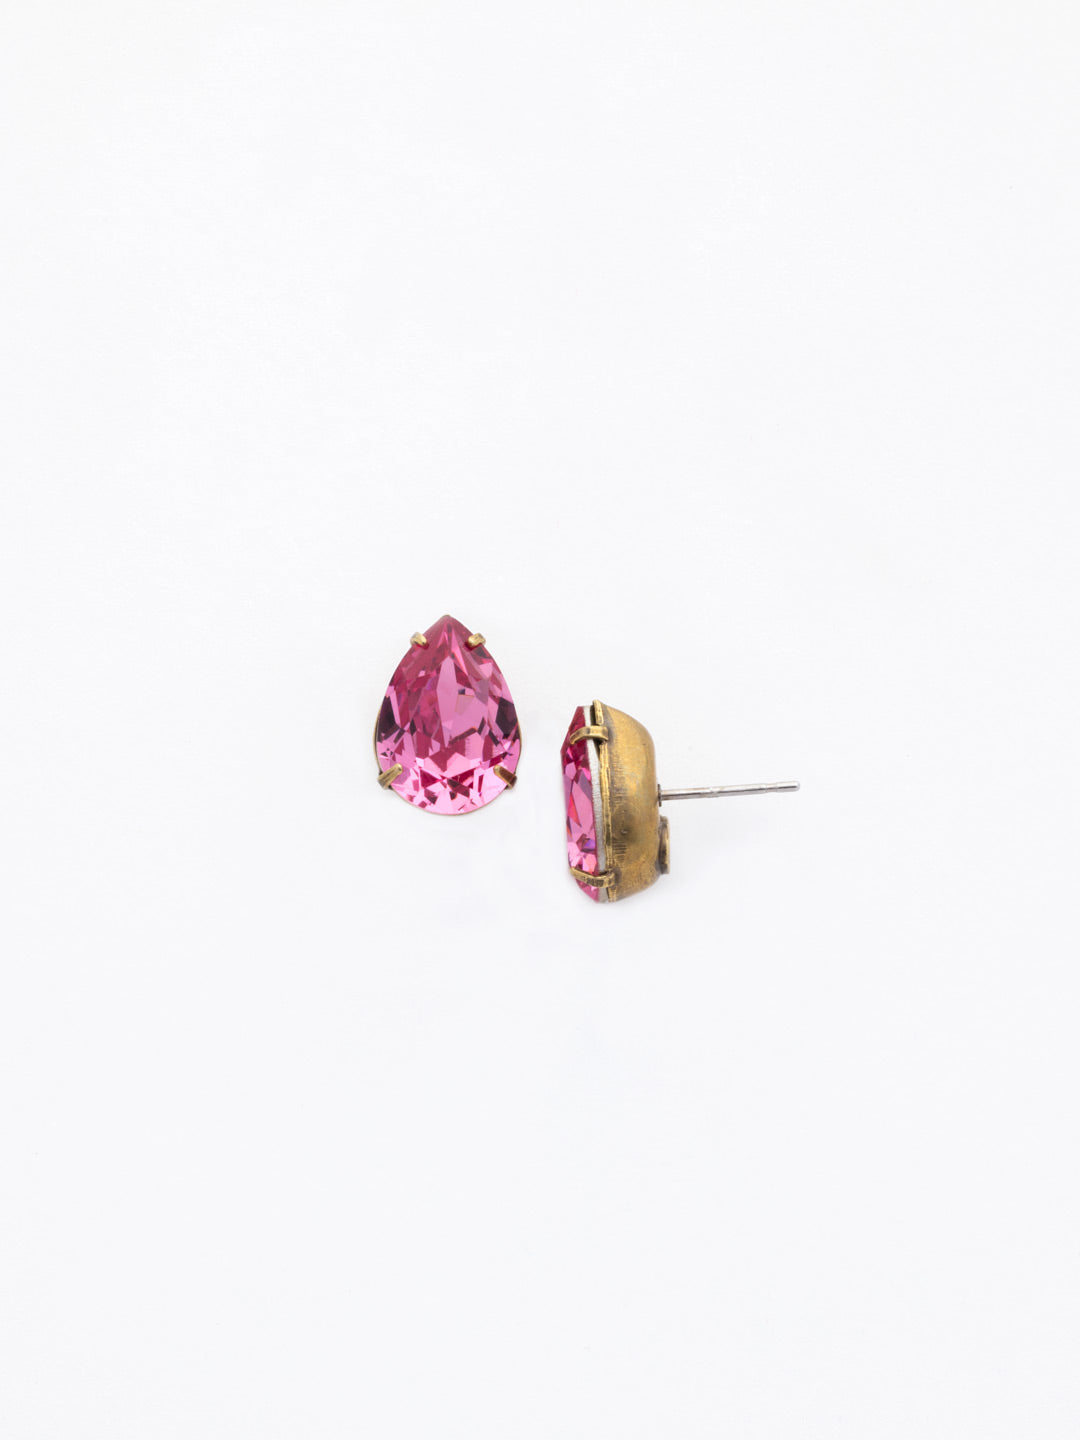 Ginnie Stud Earrings - ECR115AGHB - <p>A beautiful basic stud. These classic single teardrop post earrings are perfect for any occasion, especially the everyday look. A timeless treasure that will sparkle season after season. From Sorrelli's Happy Birthday collection in our Antique Gold-tone finish.</p>